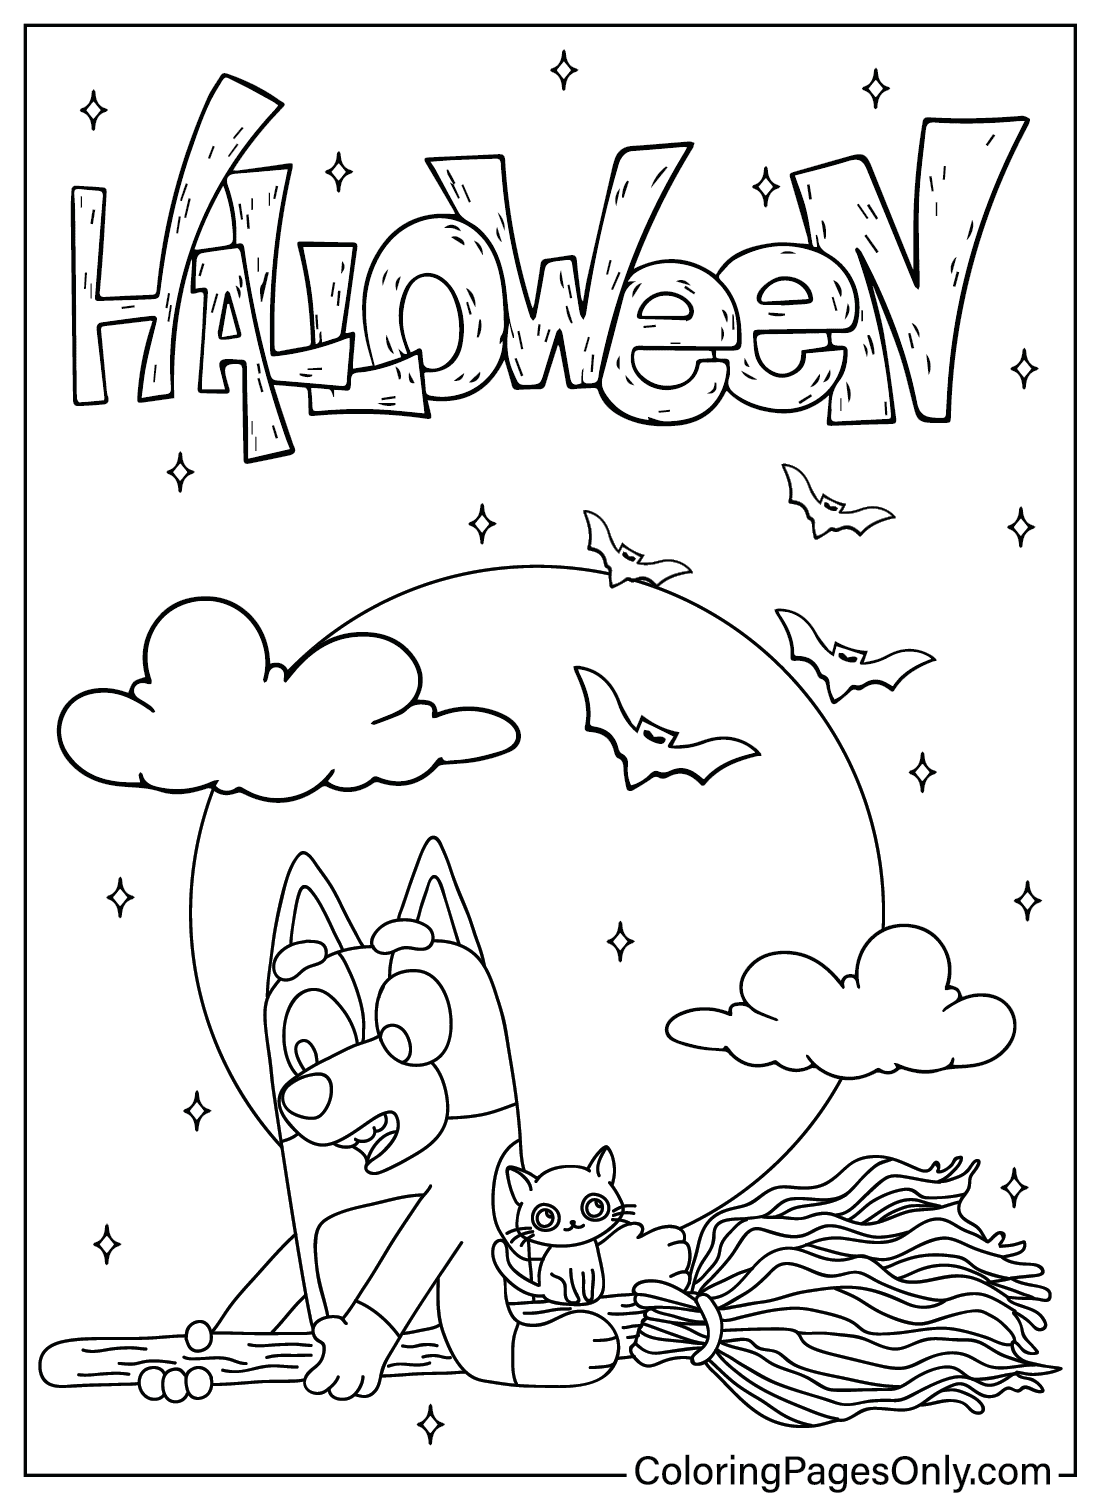 Bluey Halloween Coloring Sheet for Kids from Bluey Halloween